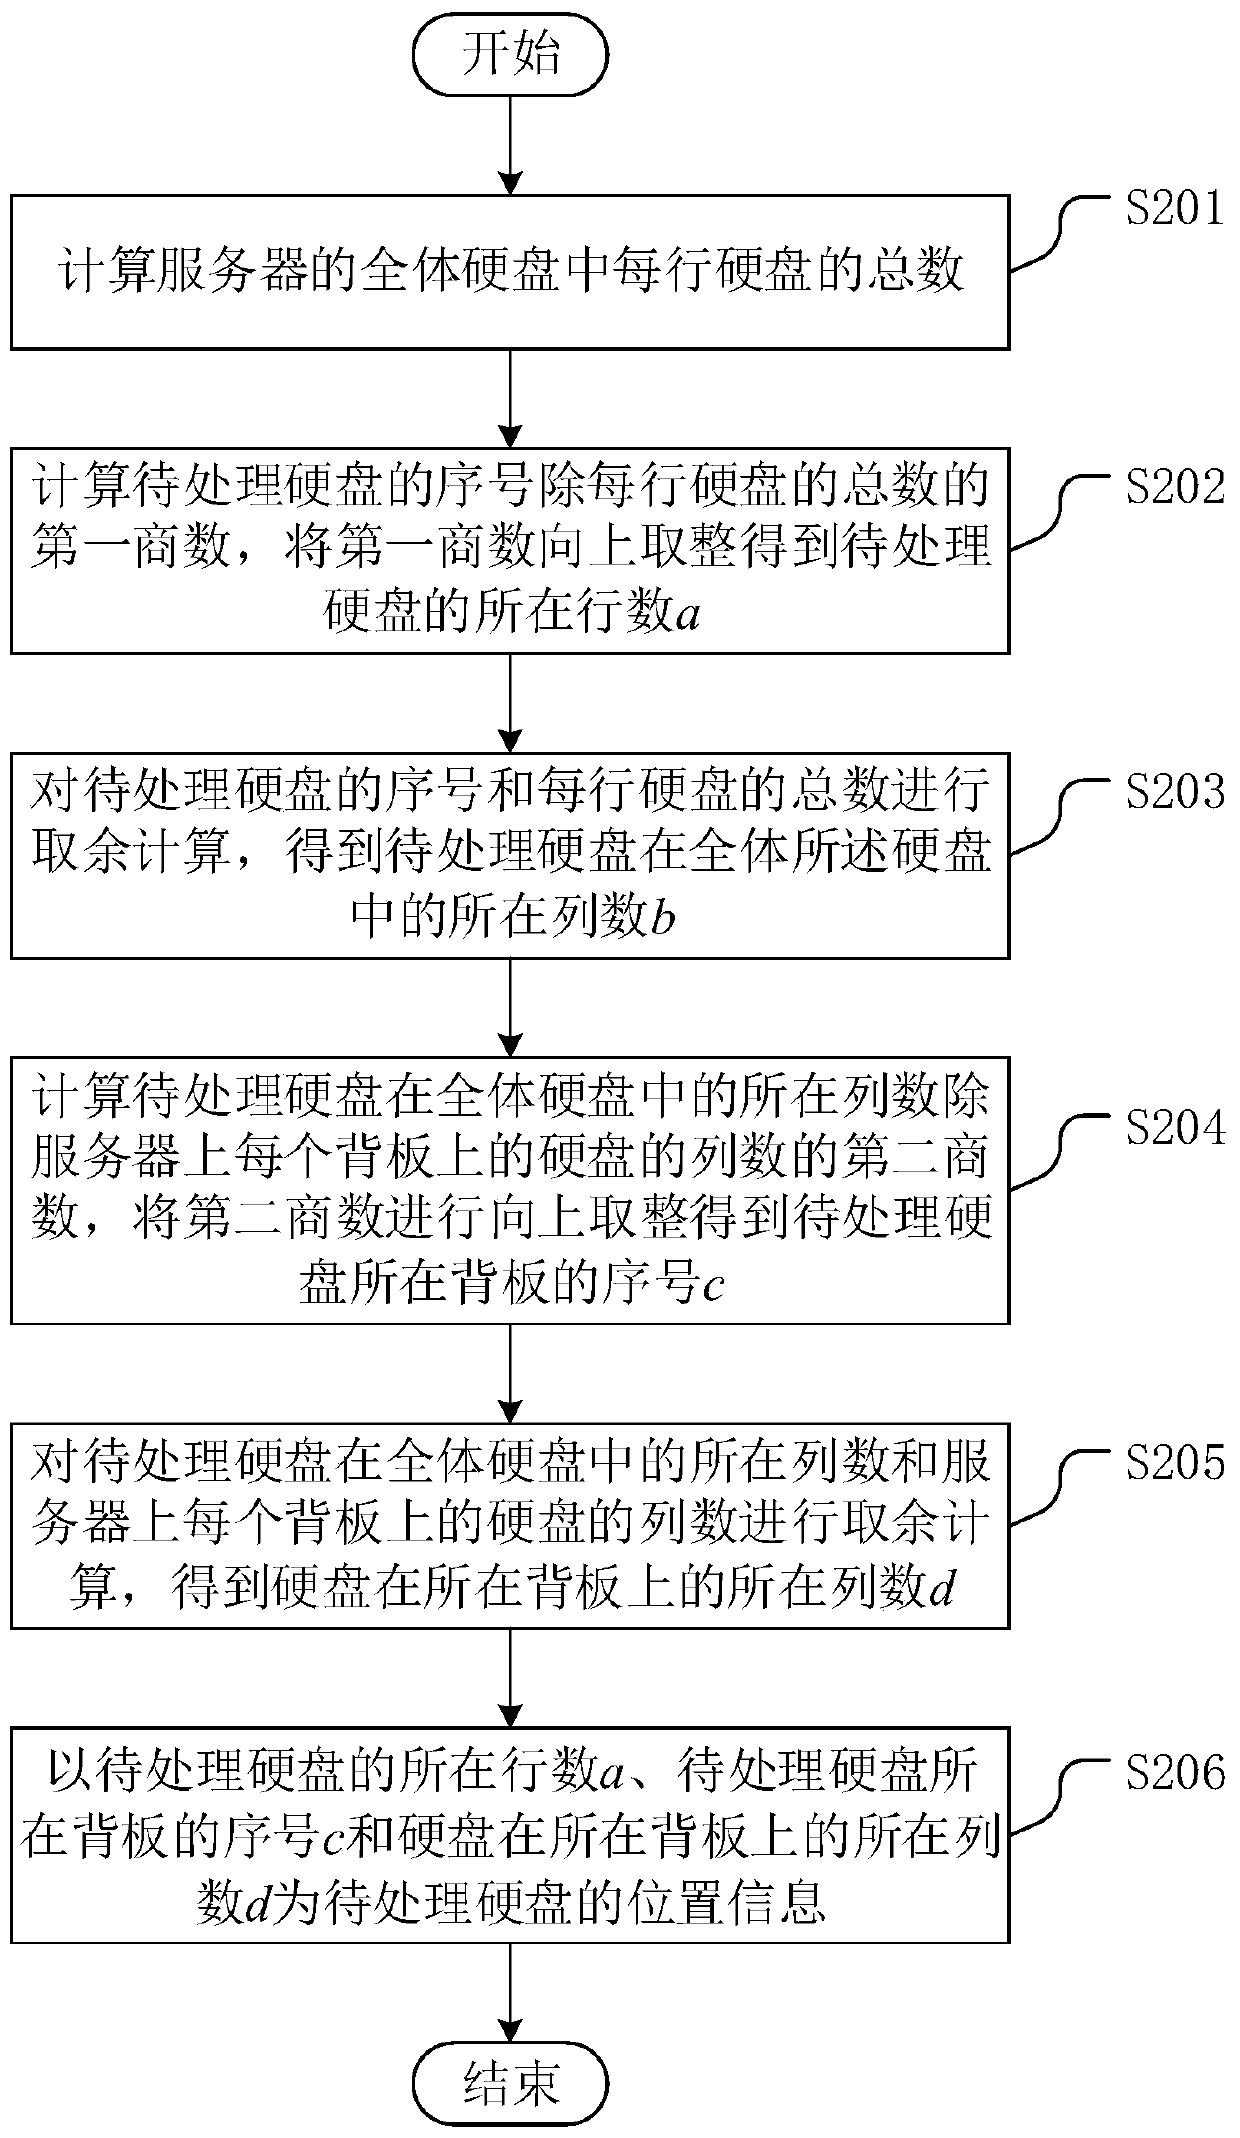 Power-on and power-off control method for hard disk of server, control device and control equipment